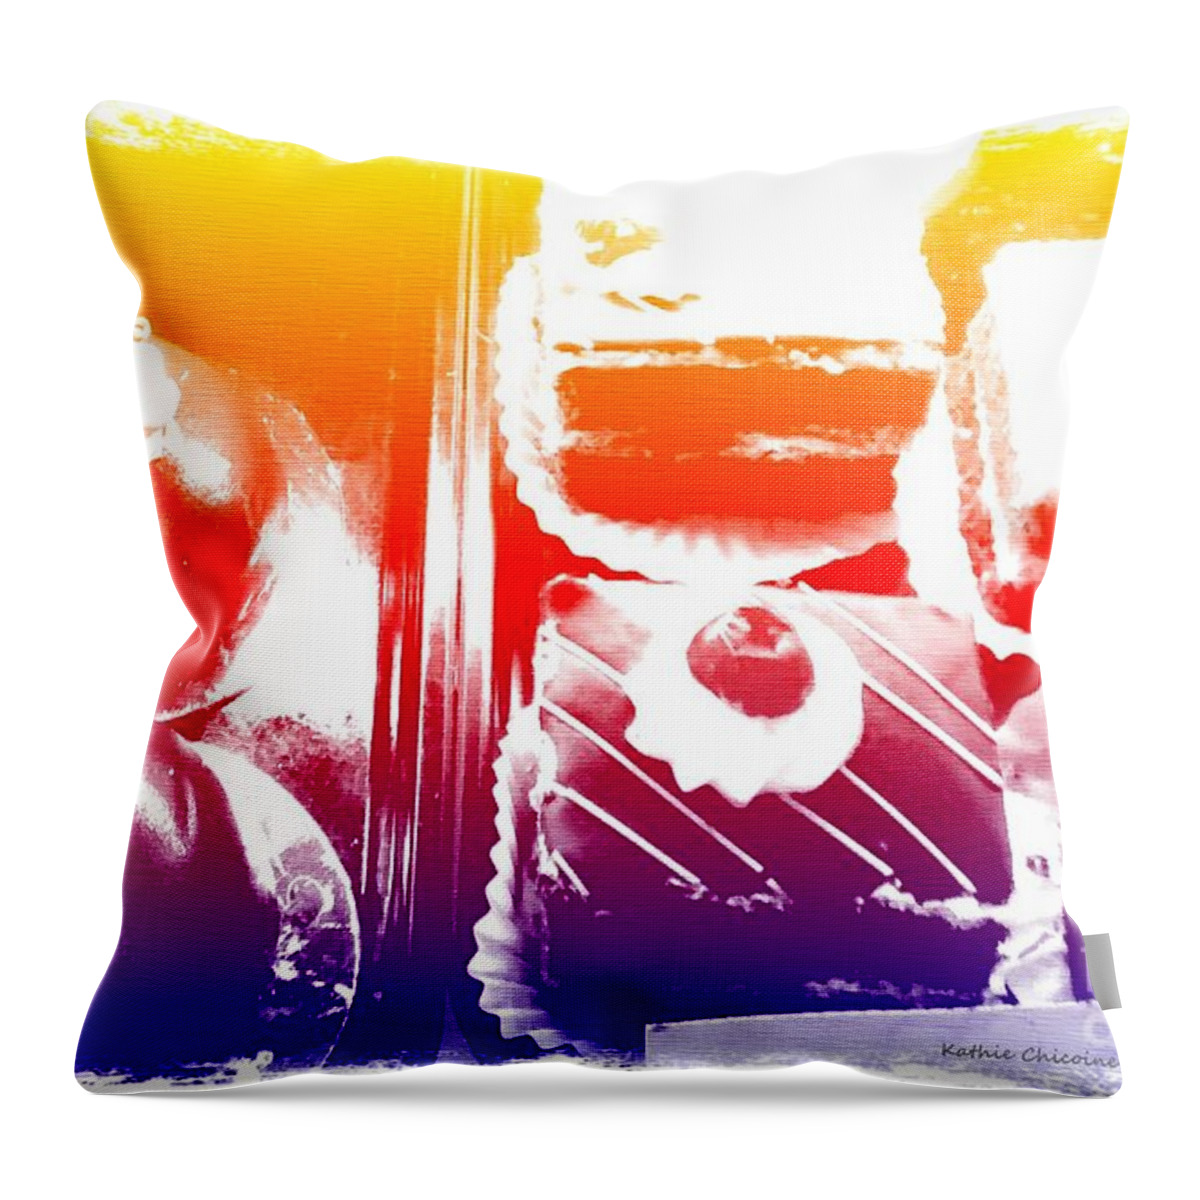 Photography Throw Pillow featuring the photograph Sweets for the Sweet by Kathie Chicoine